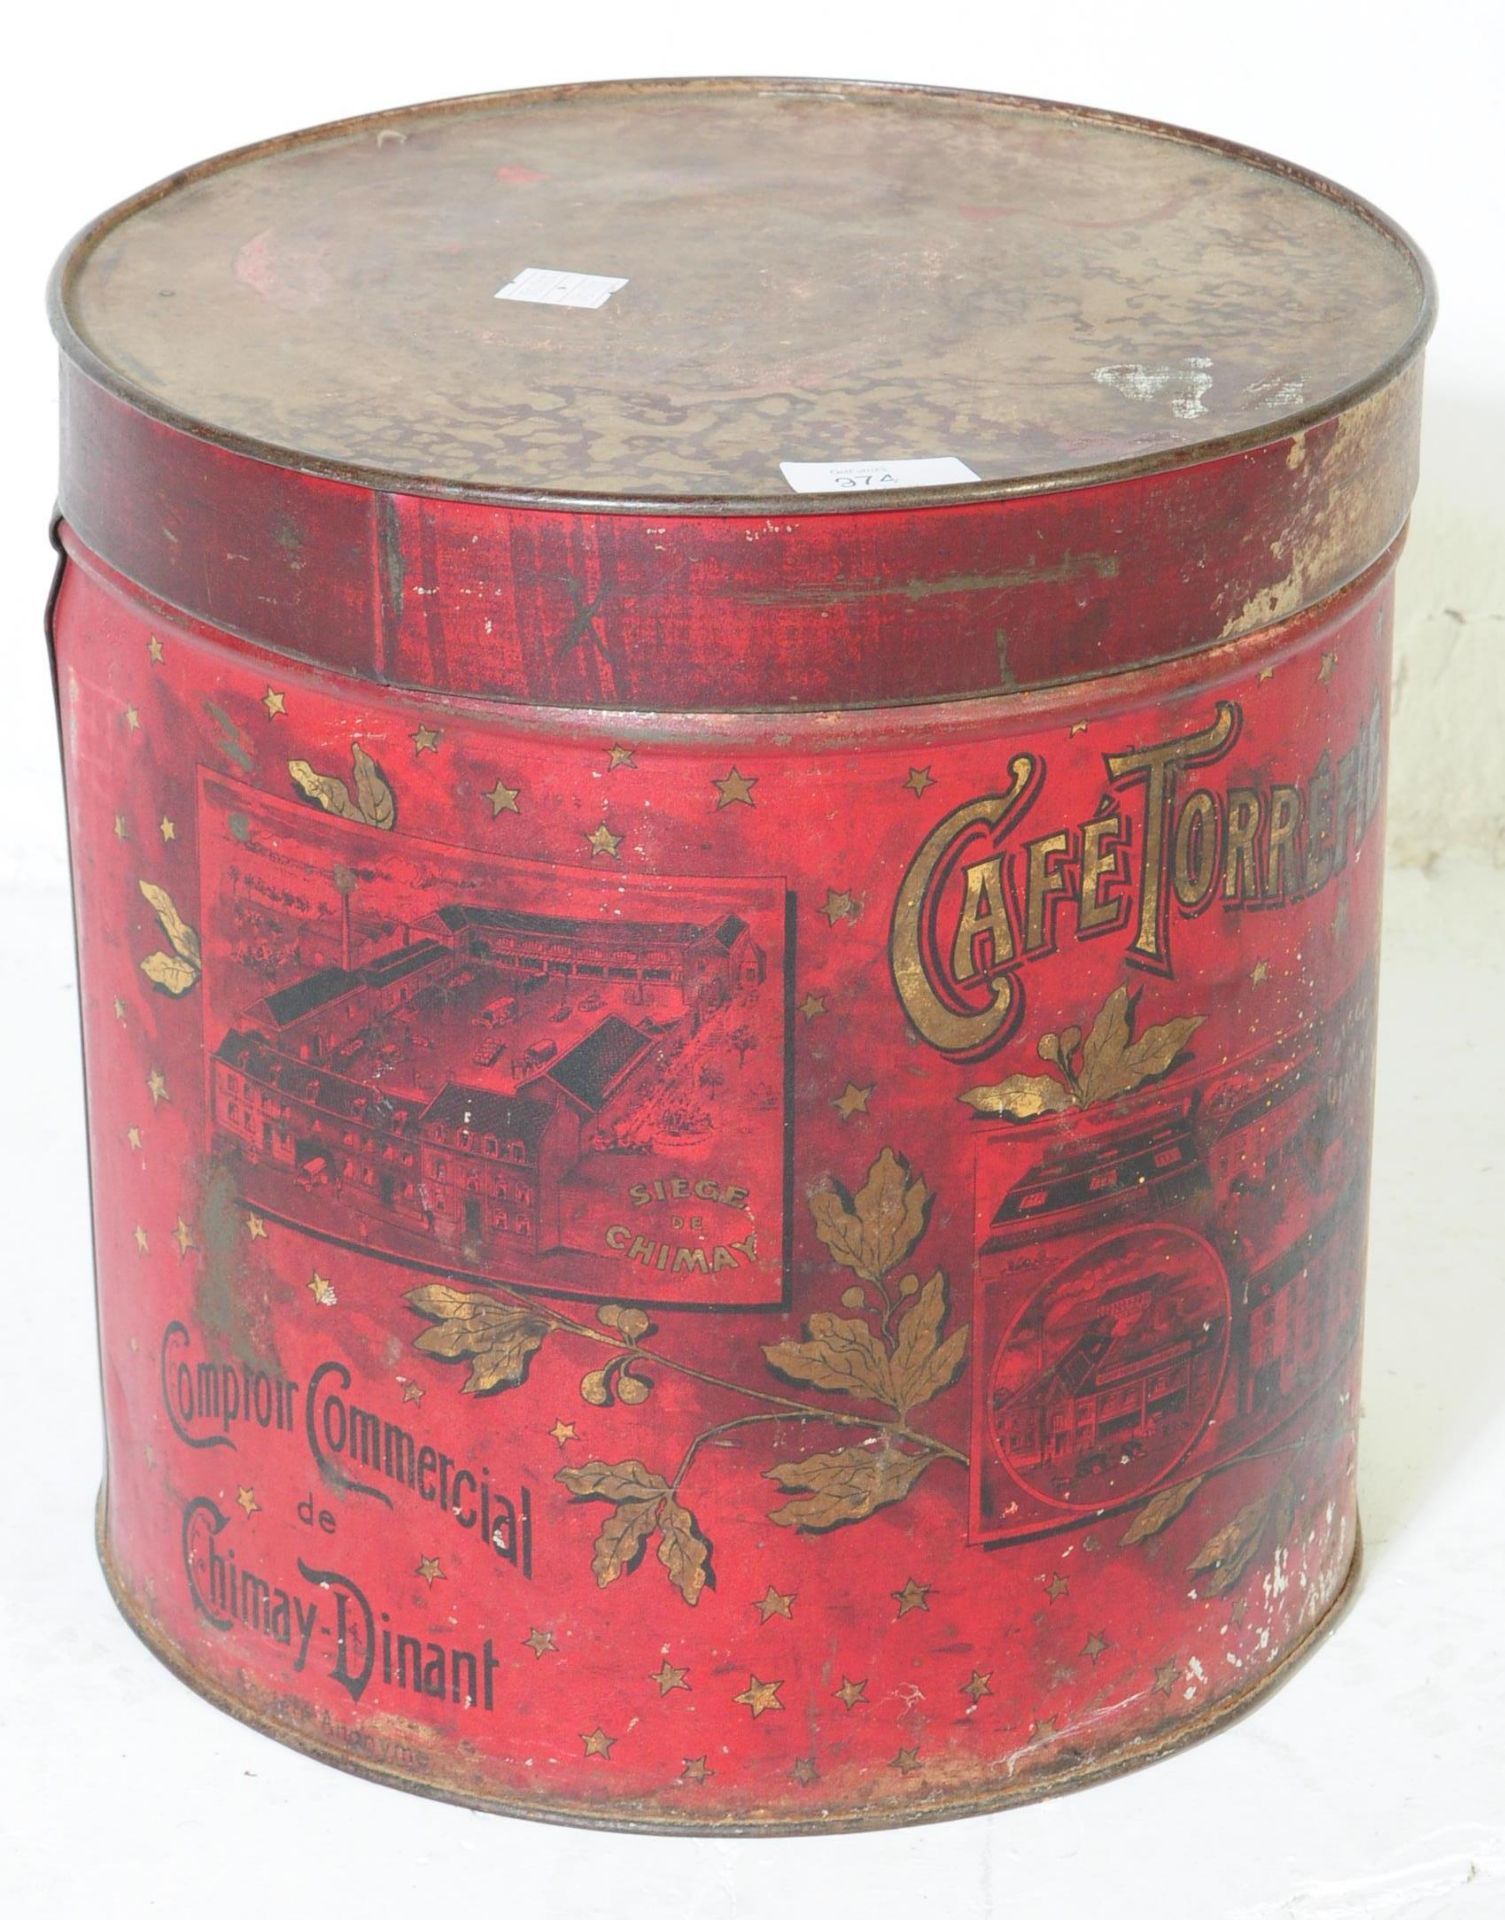 LARGE EARLY 20TH CENTURY FRENCH METAL COFFEE TIN